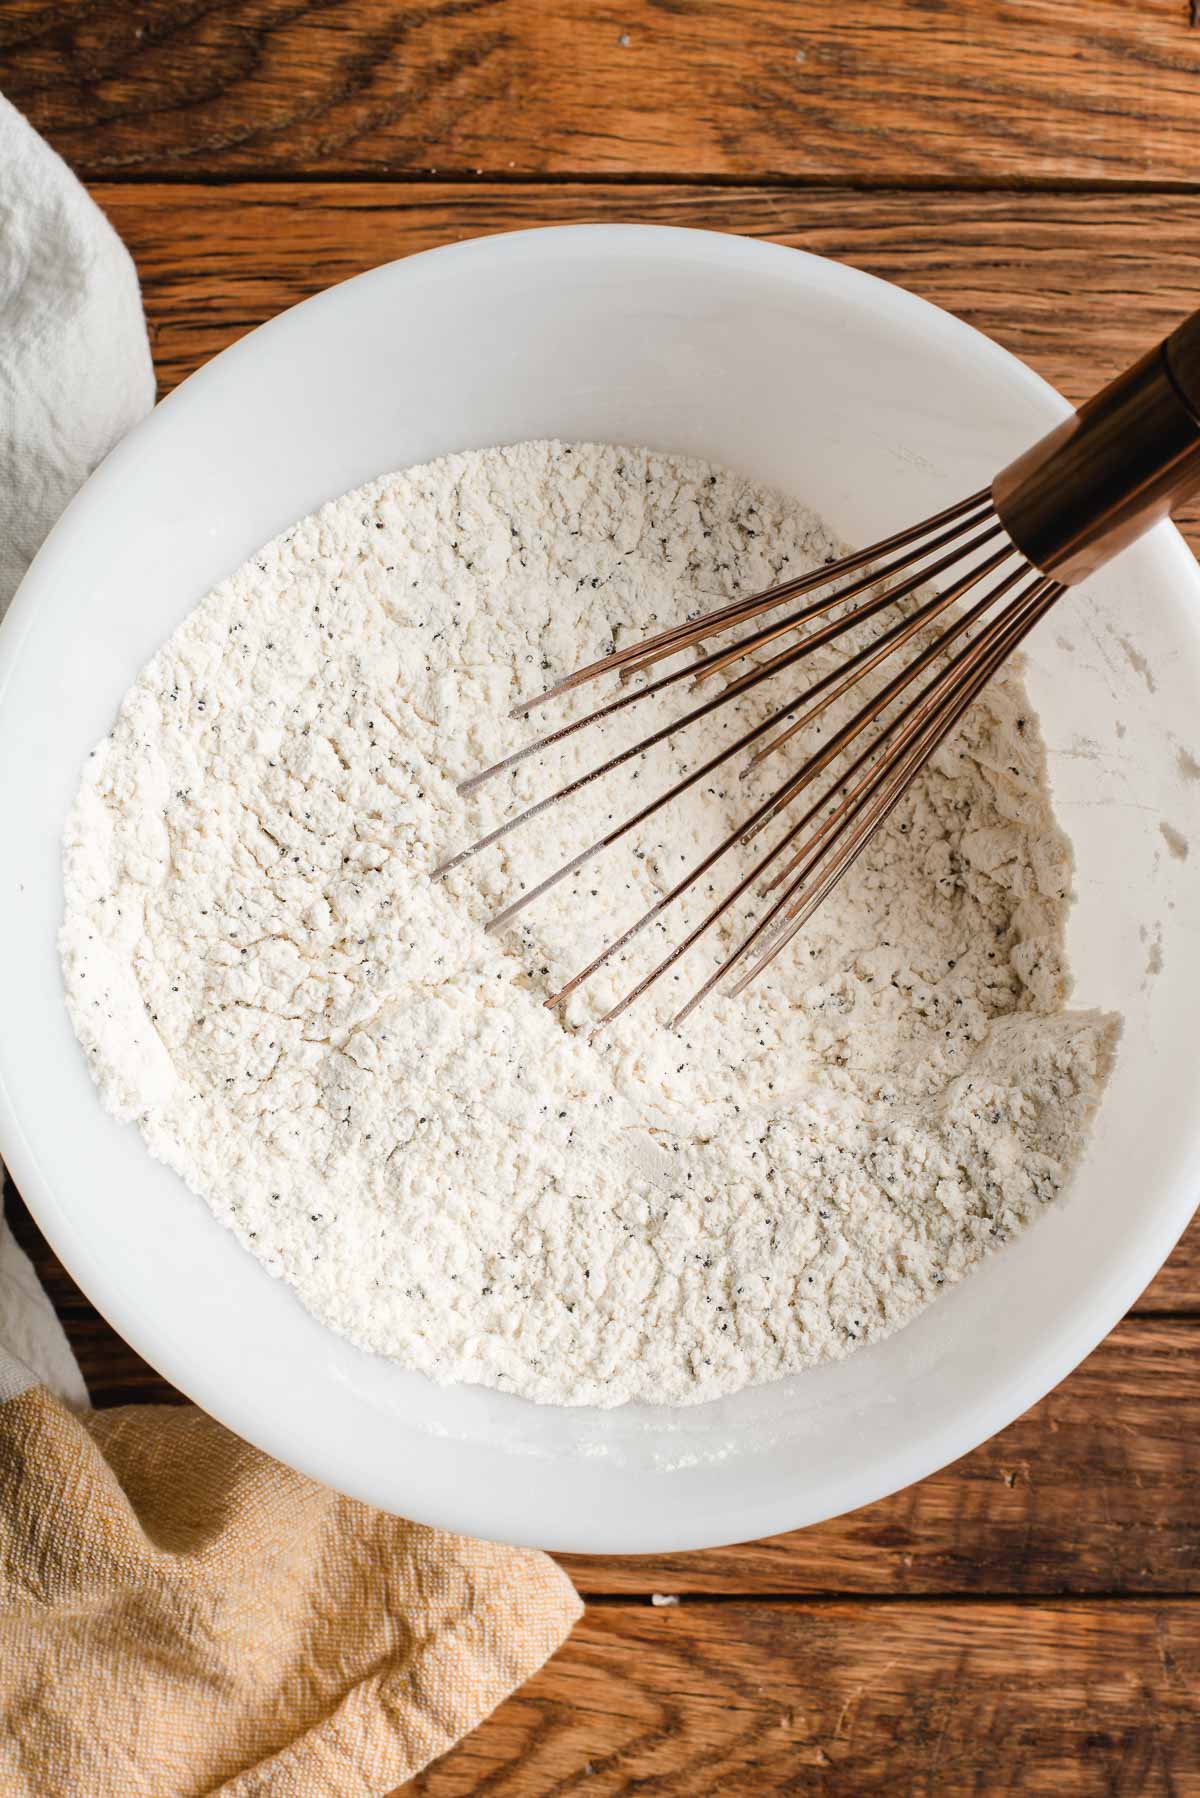 Dry ingredients for muffins in a white mixing bowl with a whisk.